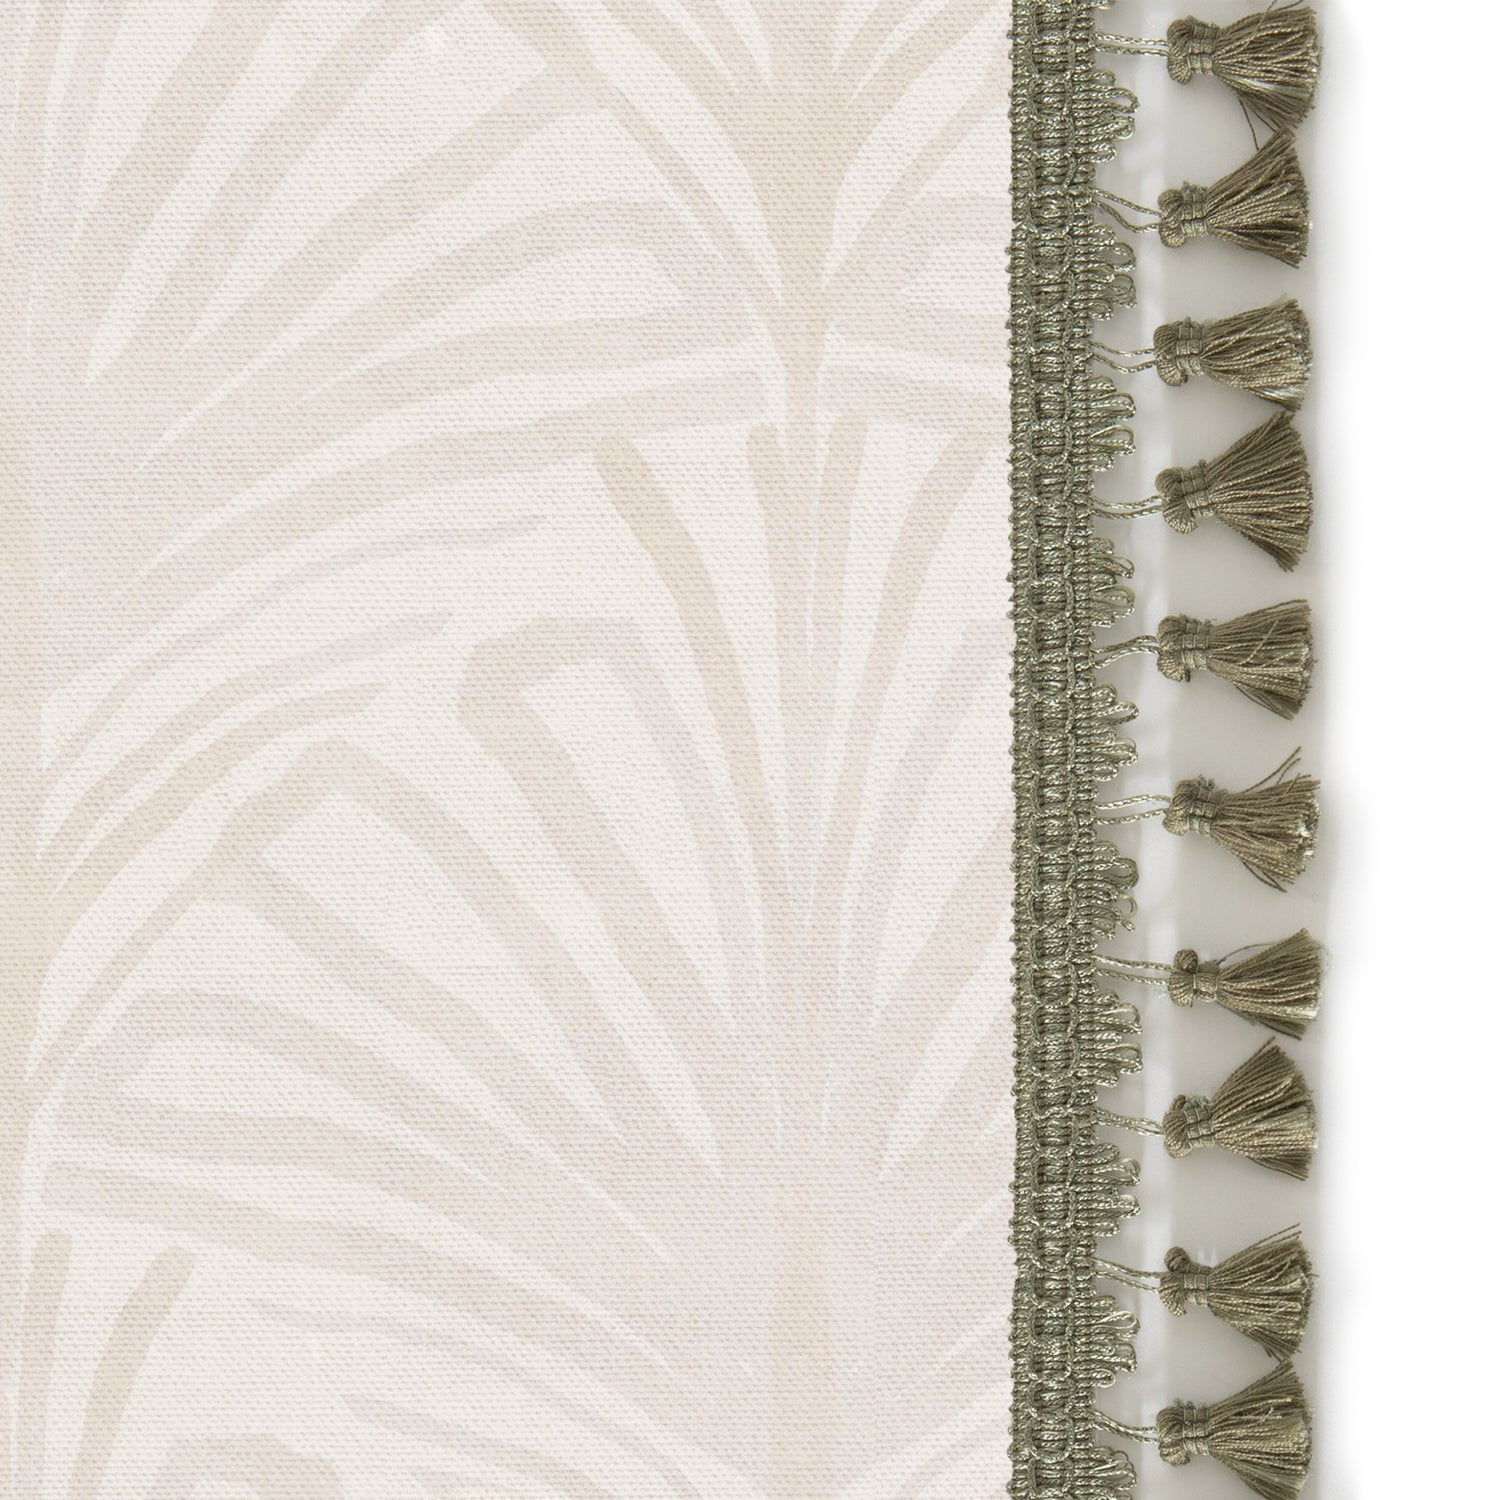 Upclose picture of Suzy Sand custom shower curtain with sage tassel trim